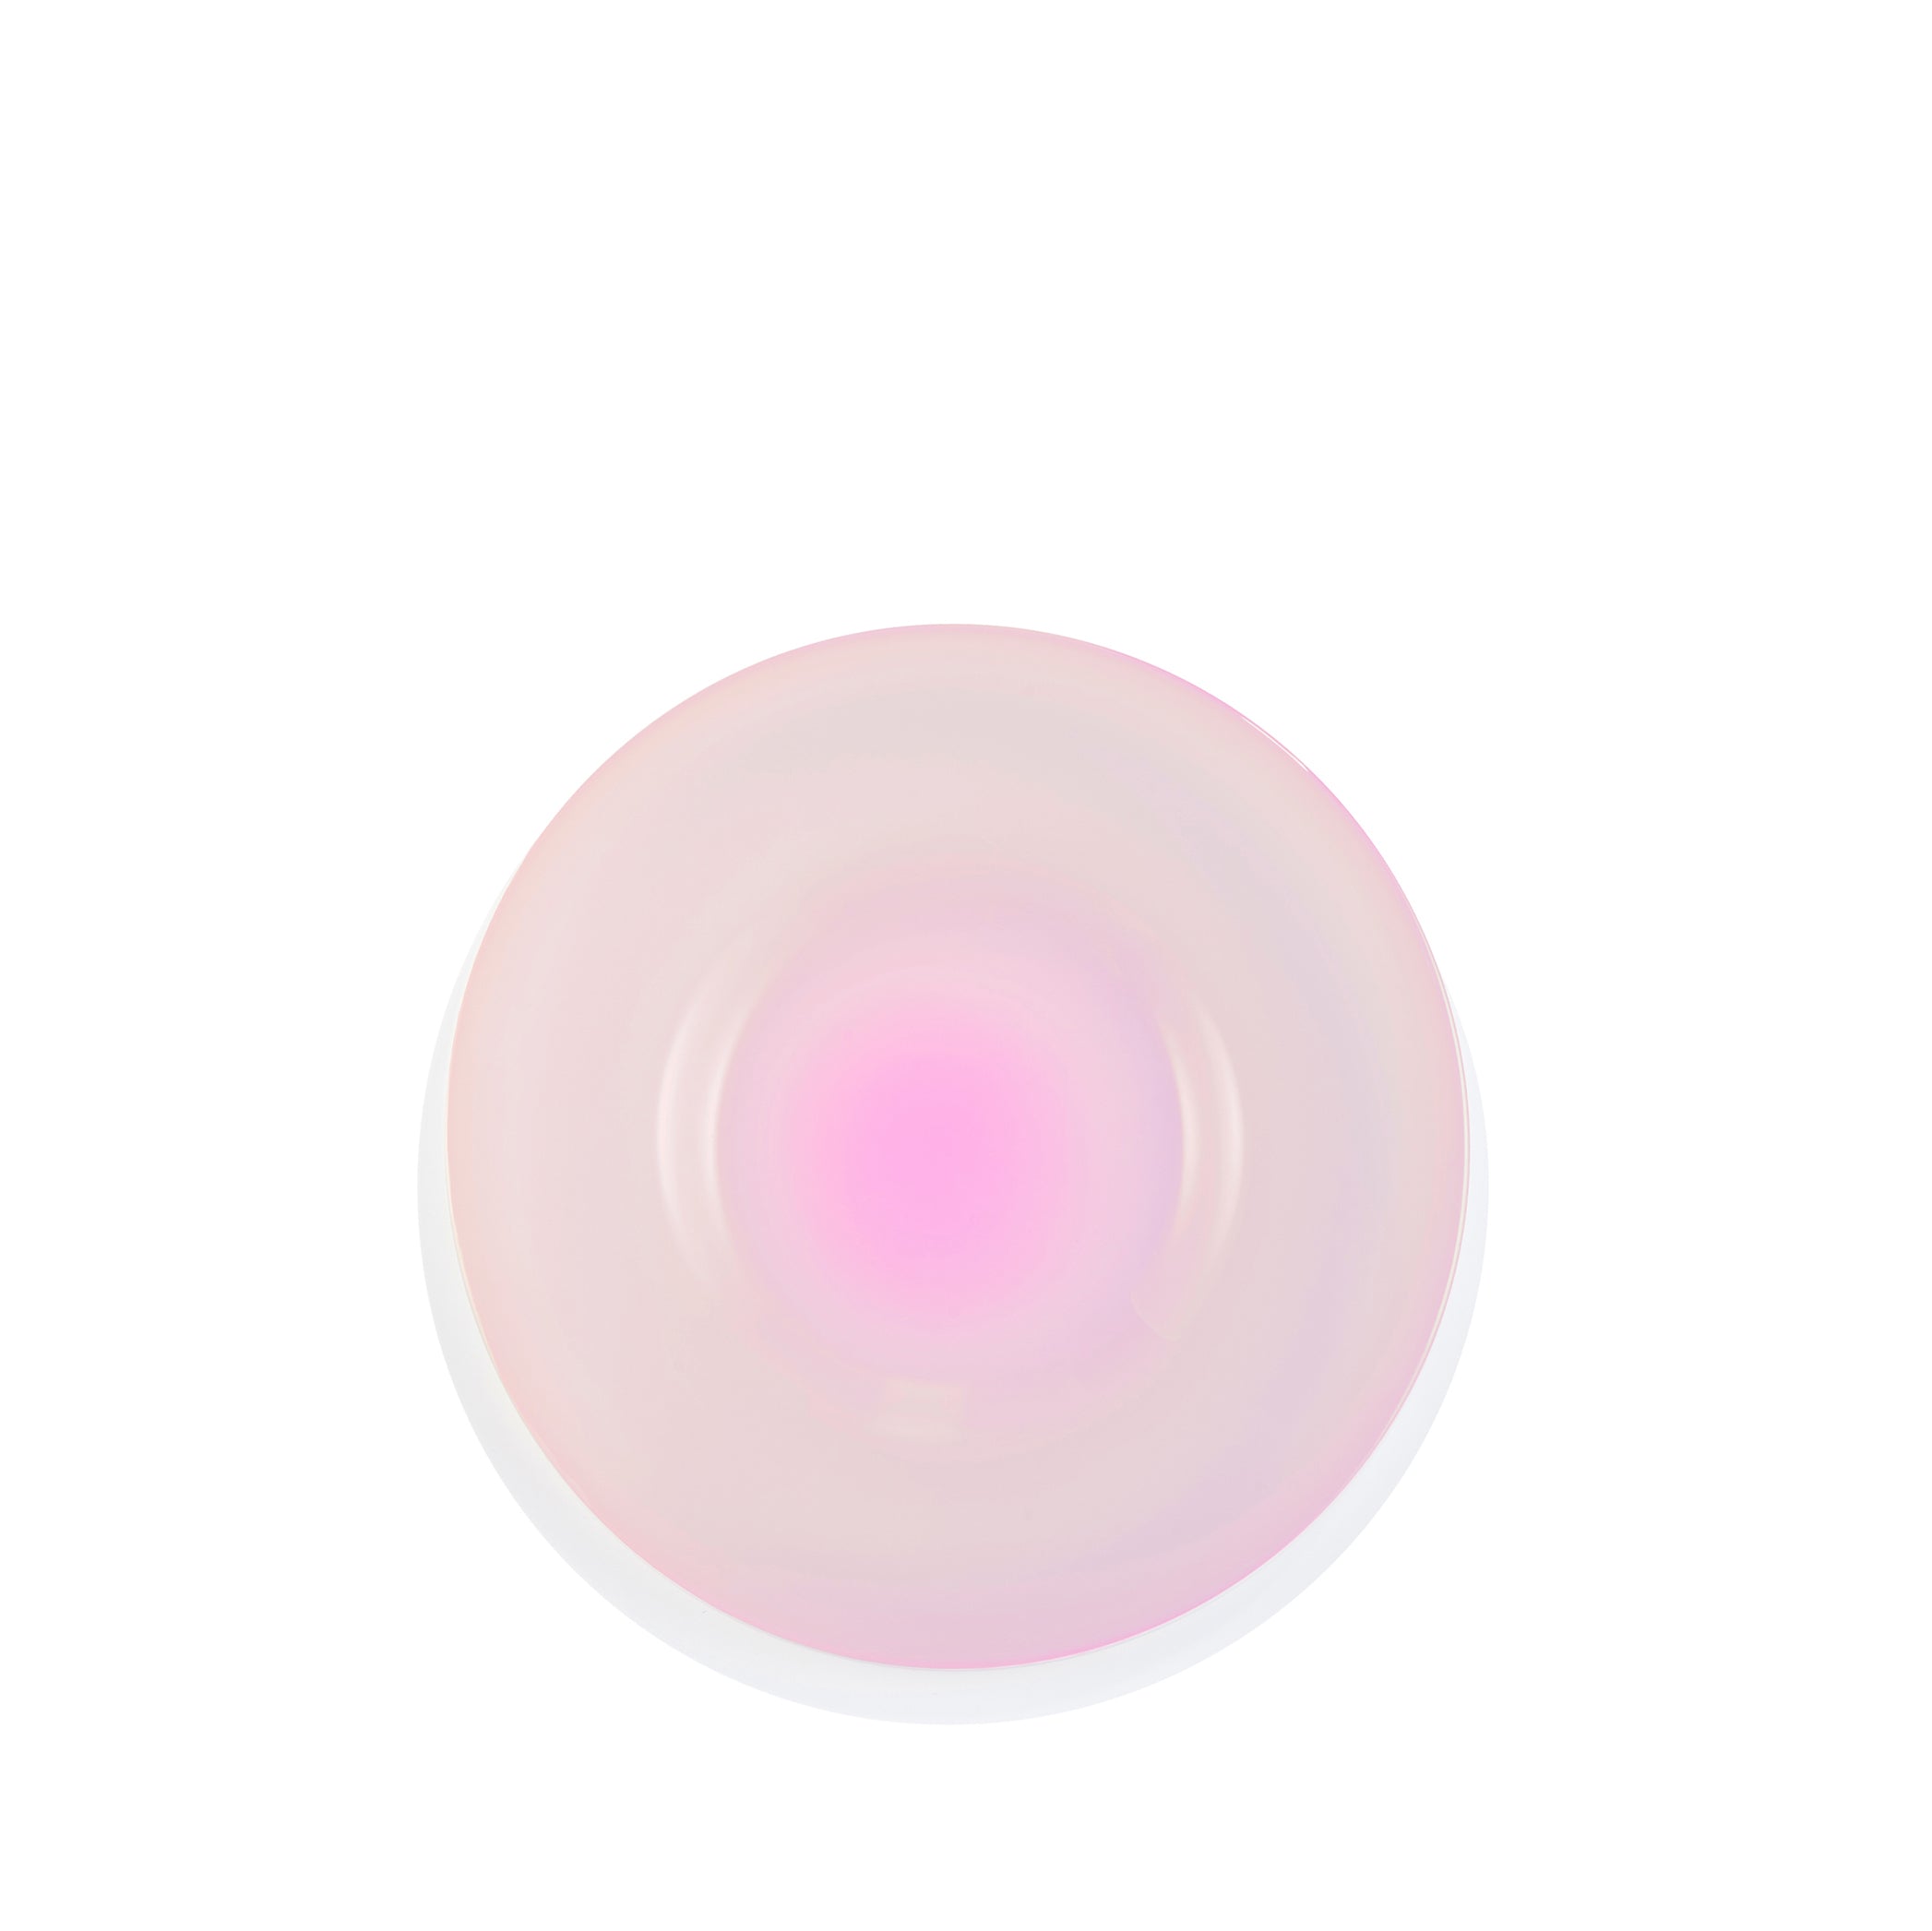 Handblown Glass Charger Plate in Rose Pink, 31cm